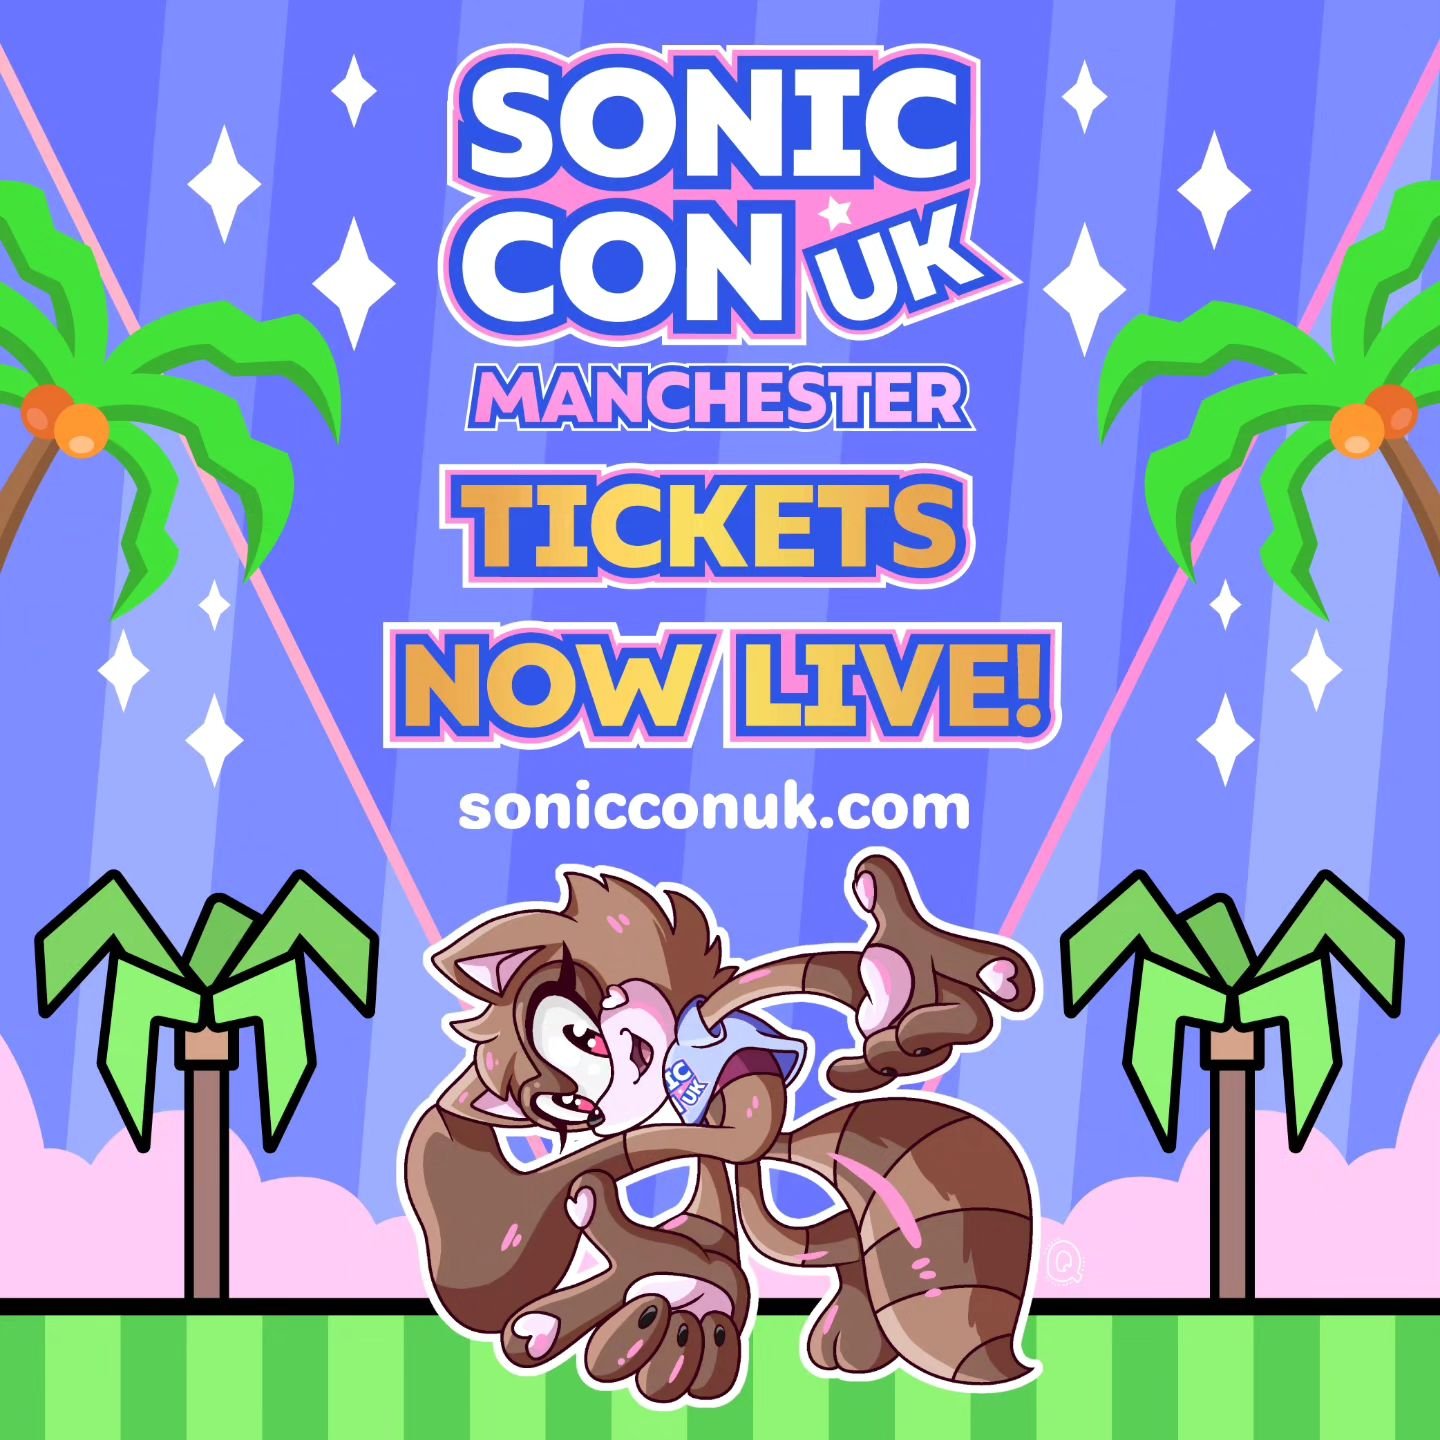 🎉💙 HUGE ANNOUNCEMENT 💙🎉 Tickets for Sonic Con UK are NOW LIVE!! 🎉💙 Link in bio! ✨ 

Rebel the Raccoon artwork by @especiallyqhere ✨💕

#sonicthehedgehog #sonic #sonicfan #sonicconvention #ukconvention